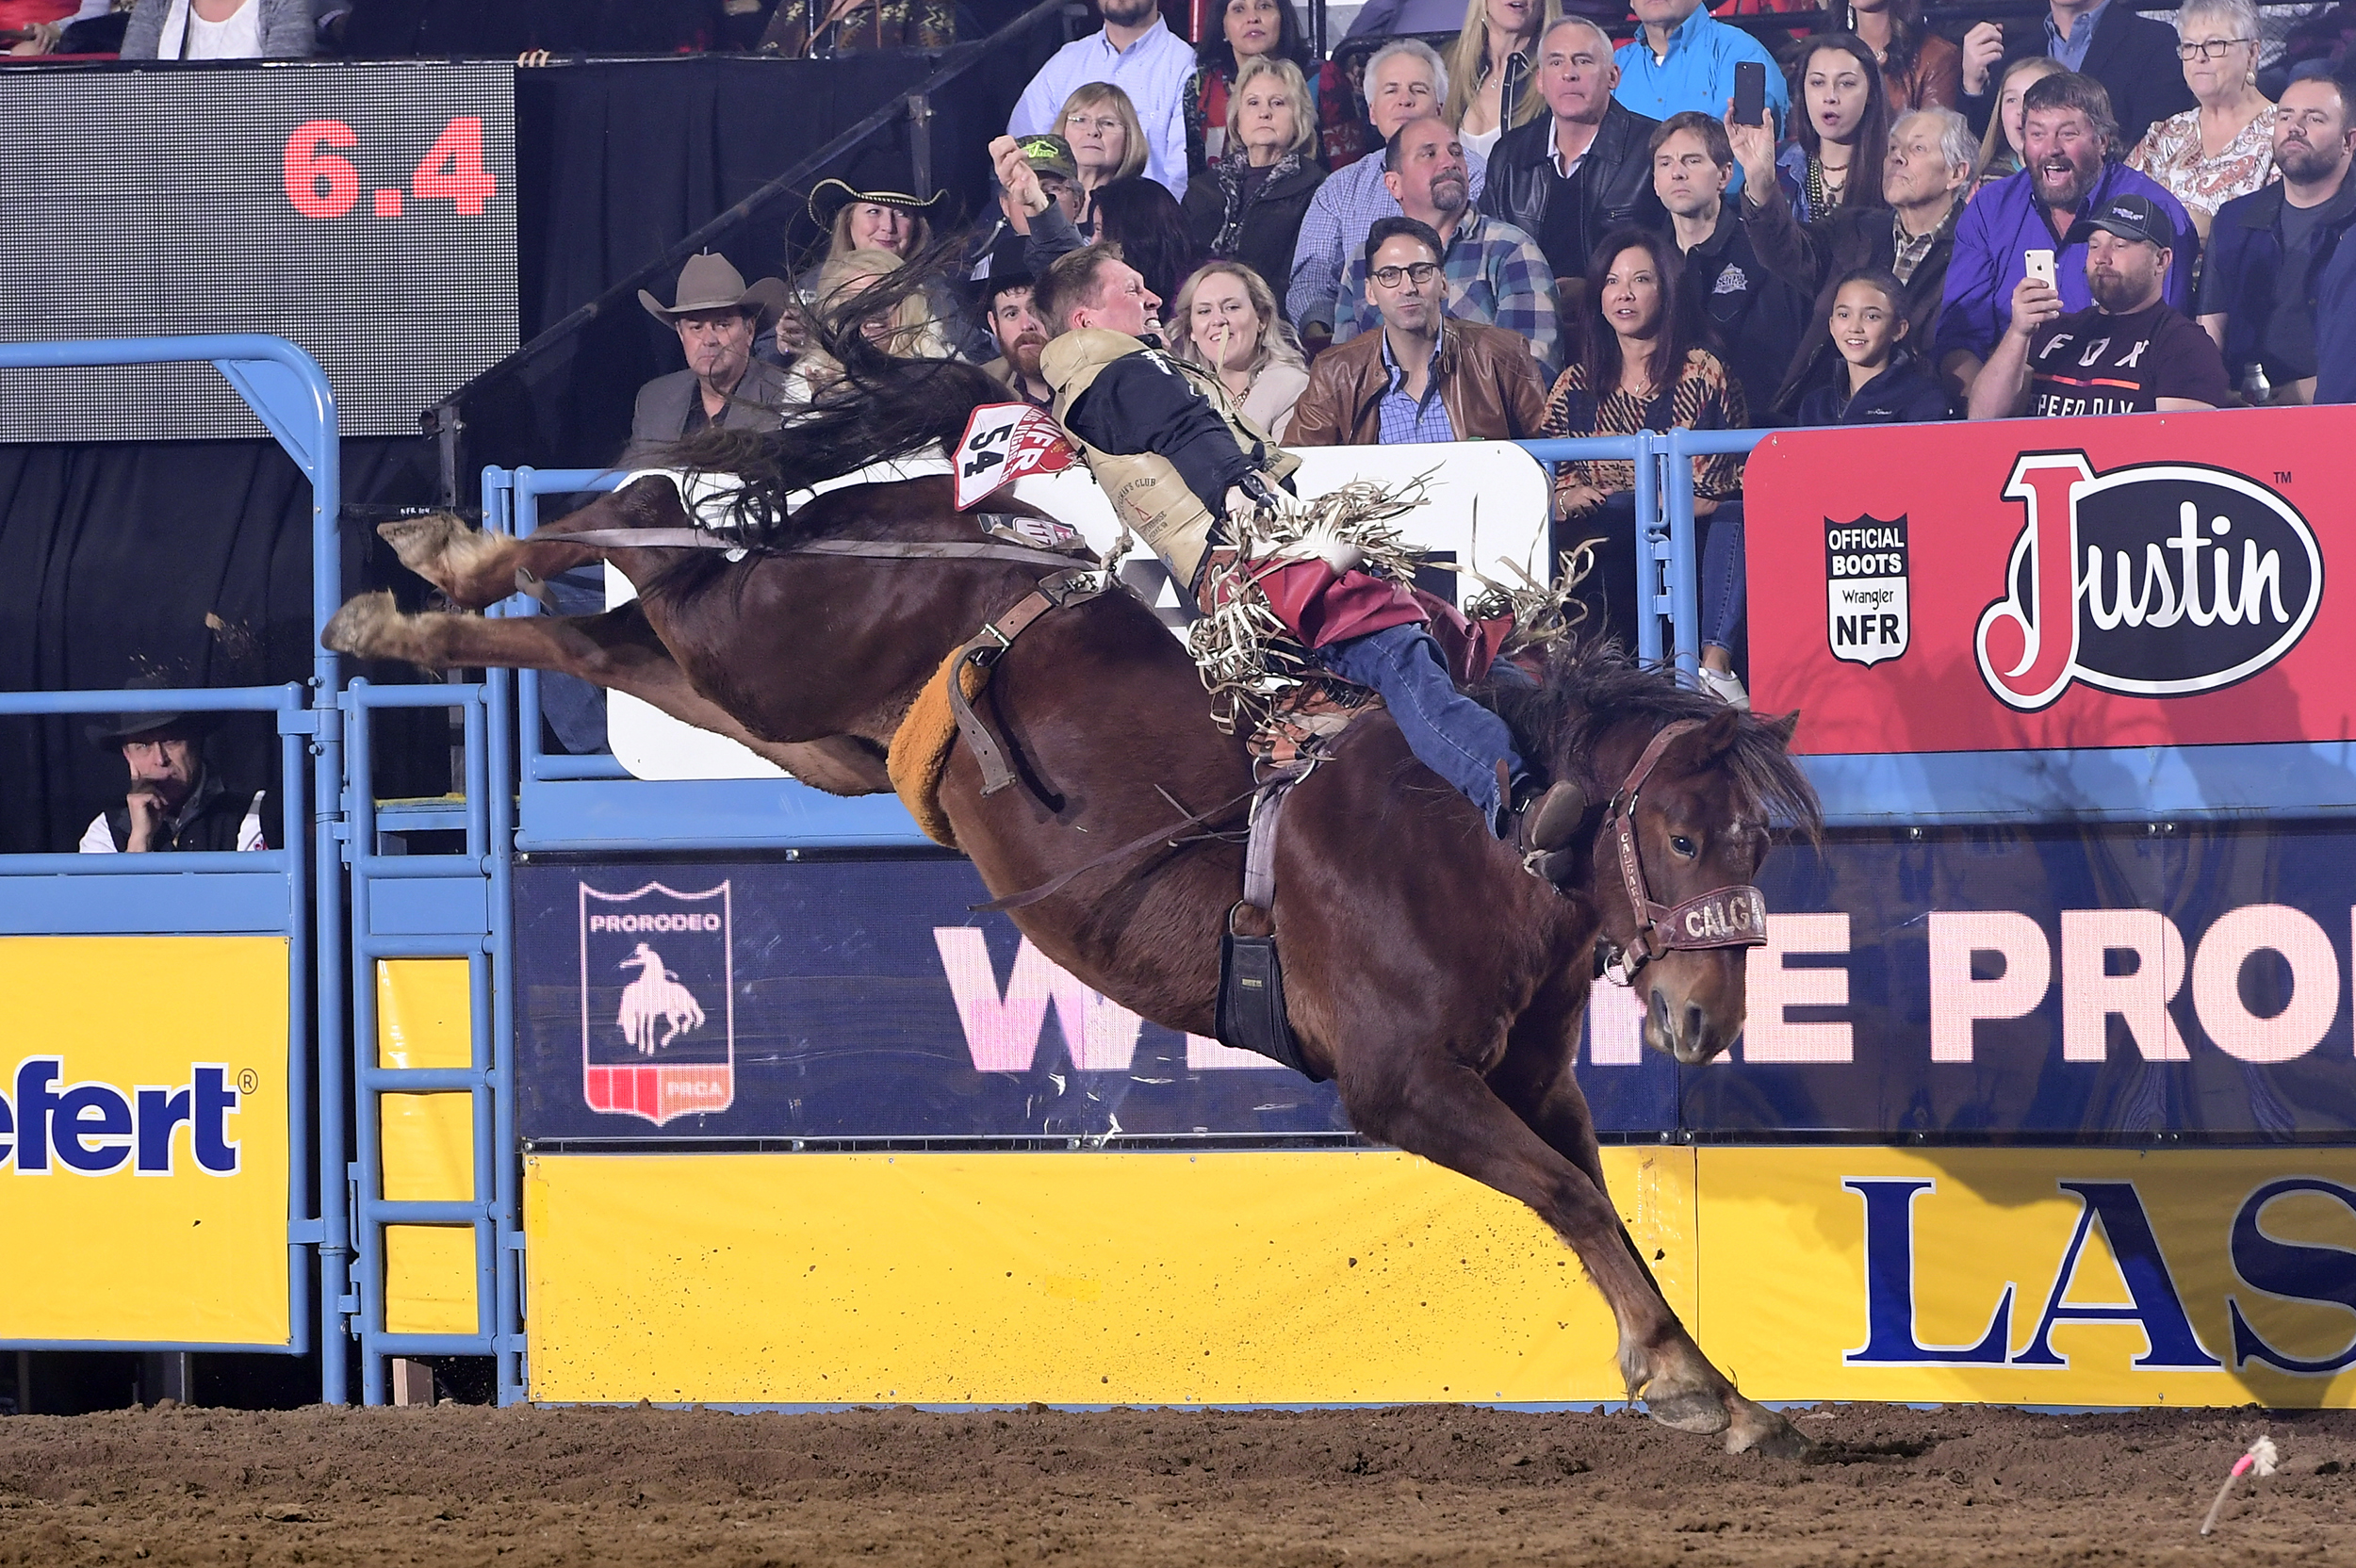 Ty Breuer won nearly $90,000 while competing at just 27 rodeos in 2019 to qualify for the National Finals Rodeo for the fifth time in his career. (PHOTO BY JAMES PHIFER)